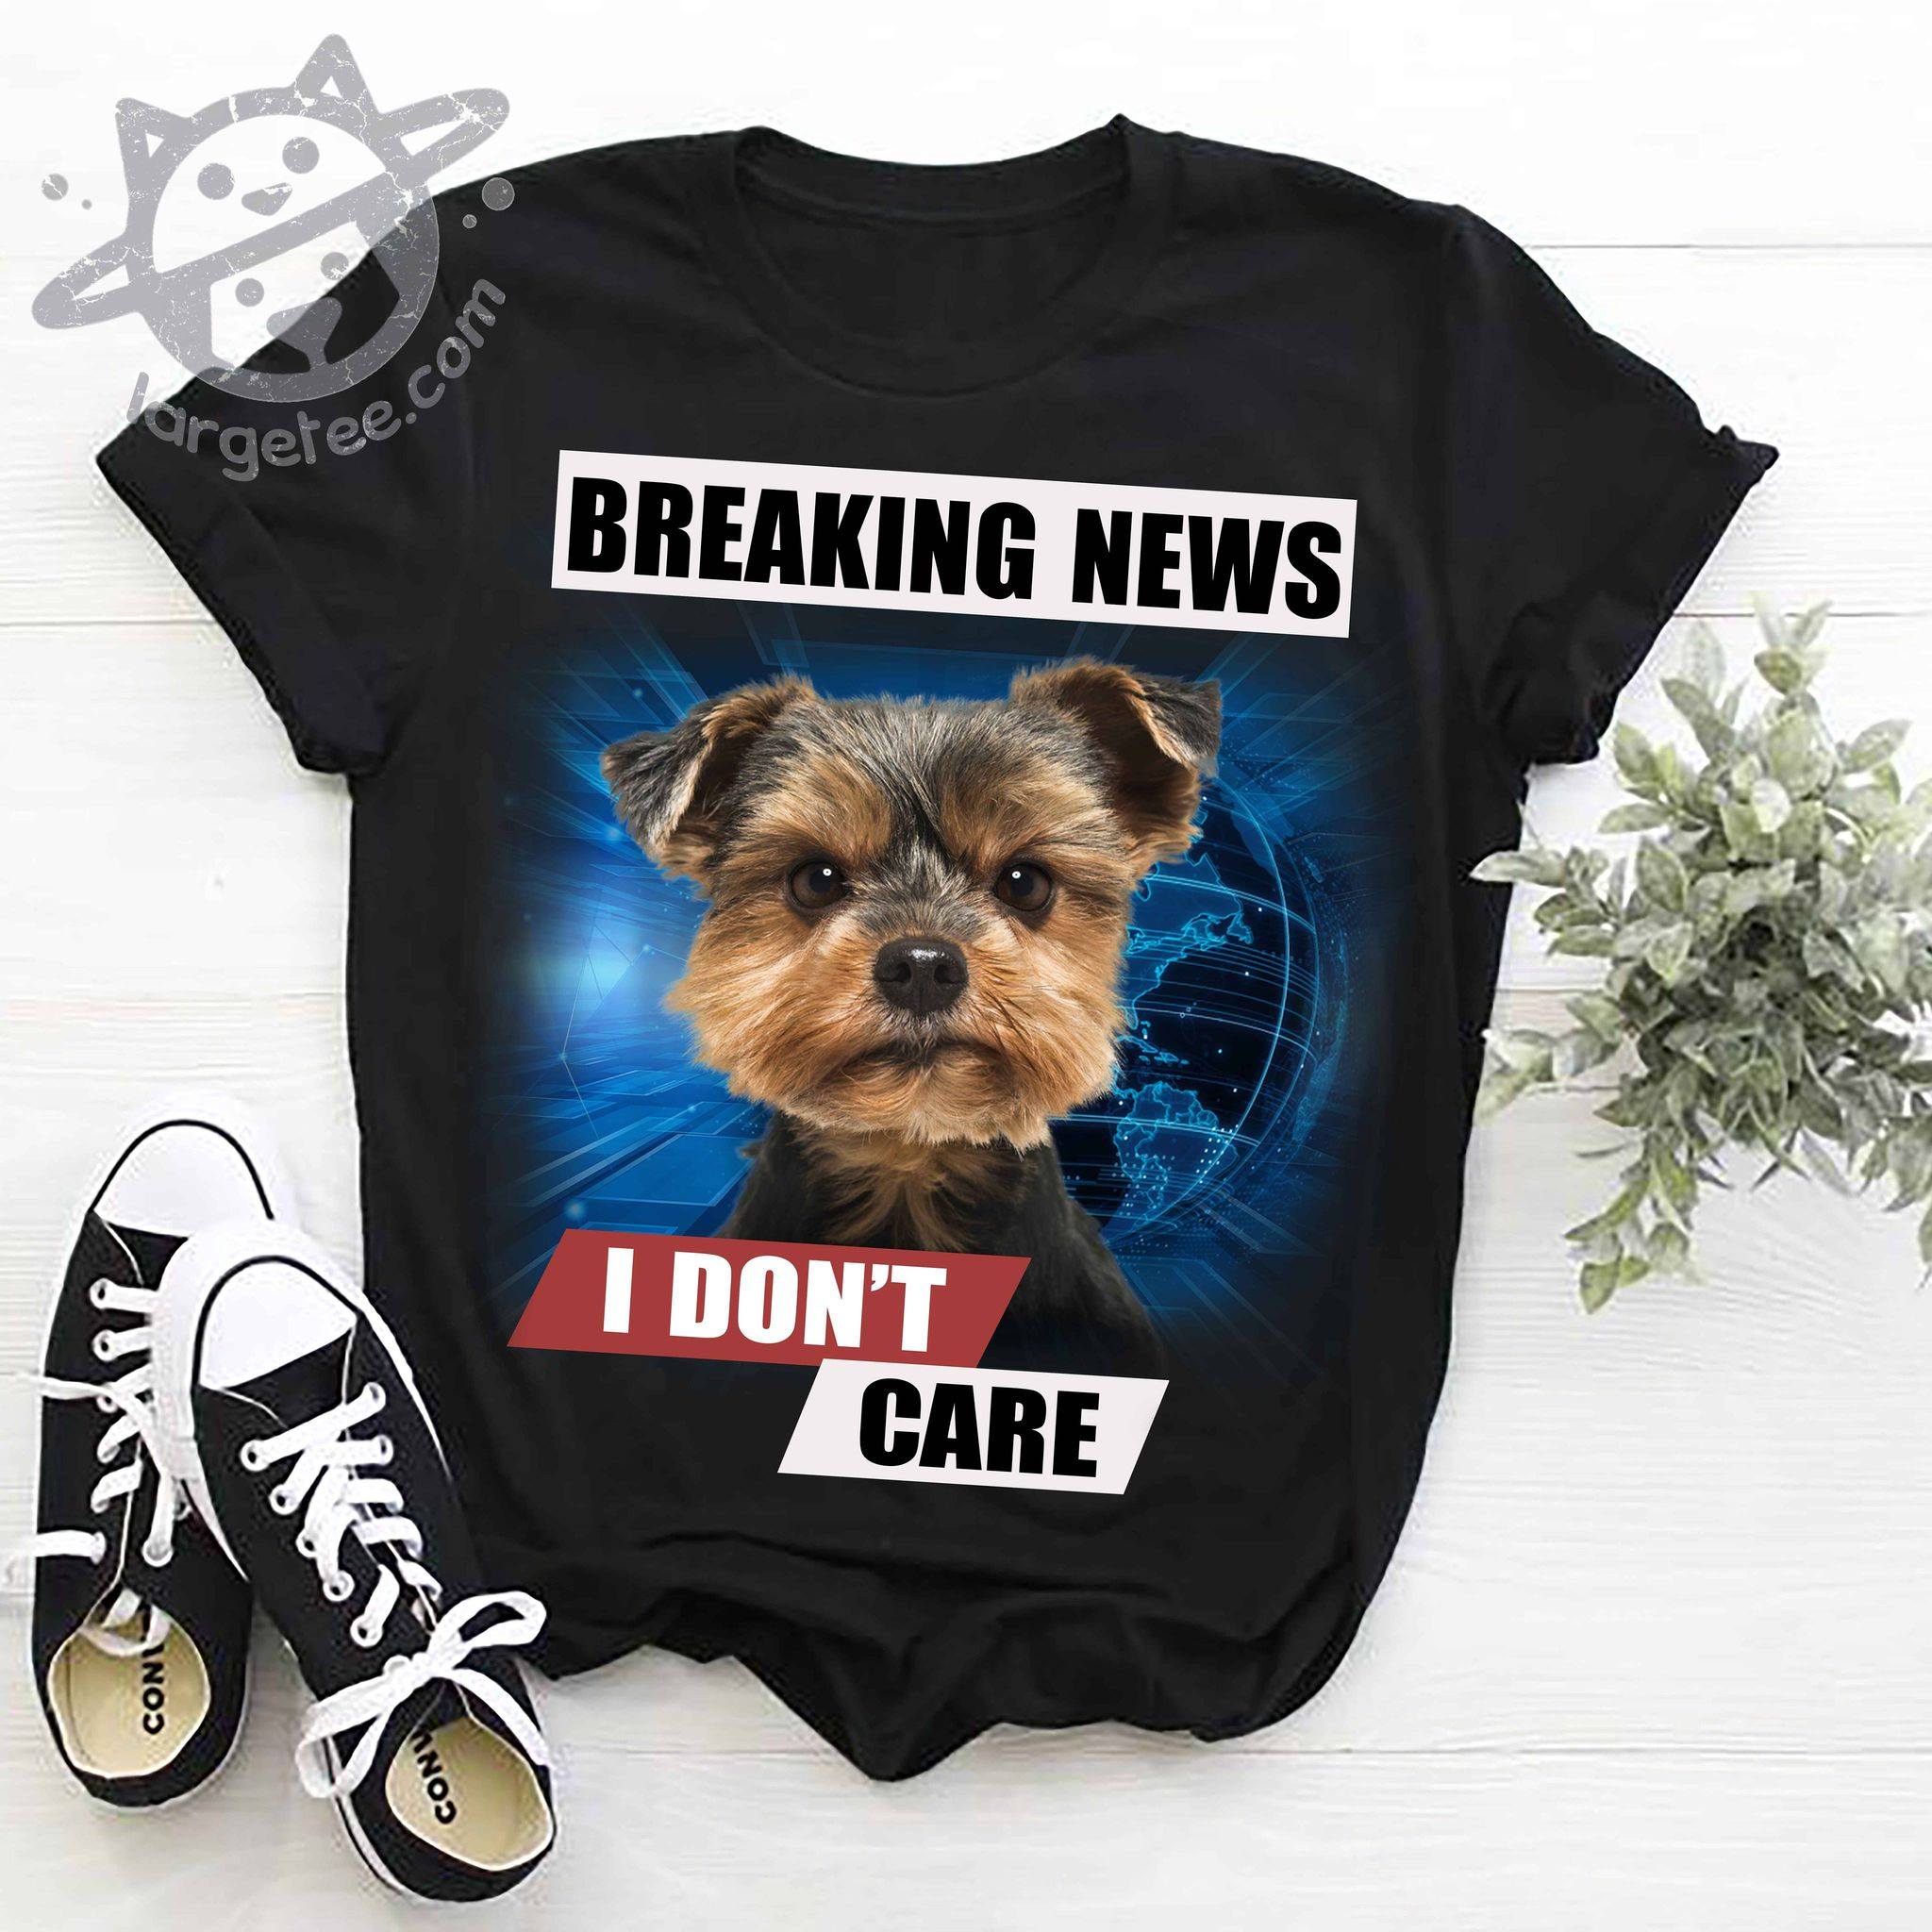 Breaking new I don't care - Shih Tzu puppy, dog lover